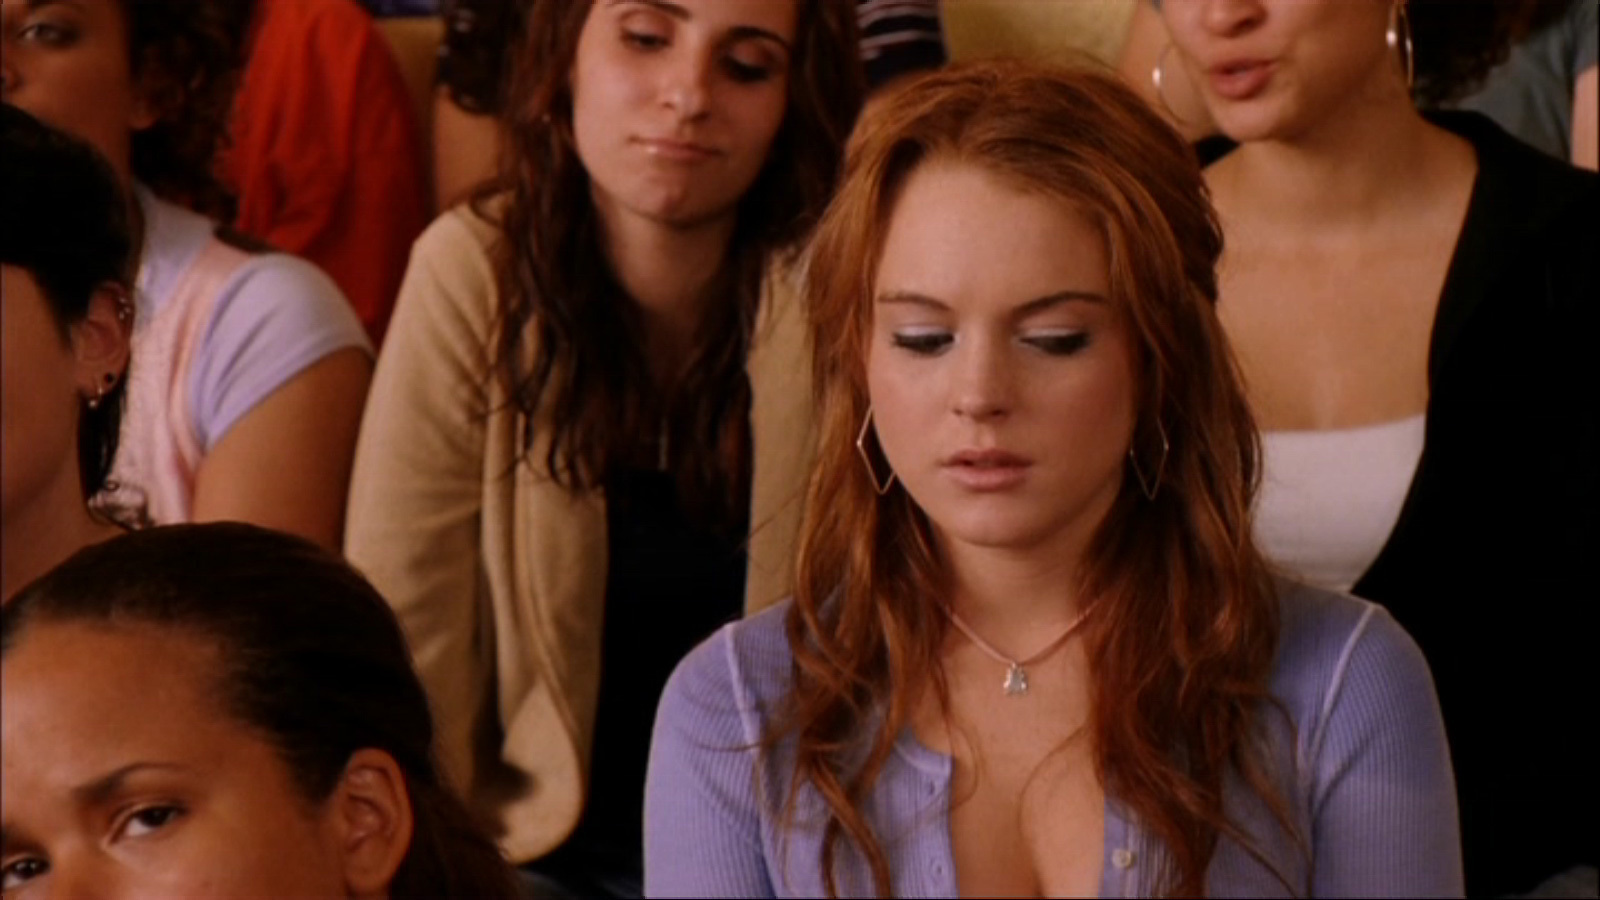 Image of Mean Girls screencap for fans of Mean Girls. 